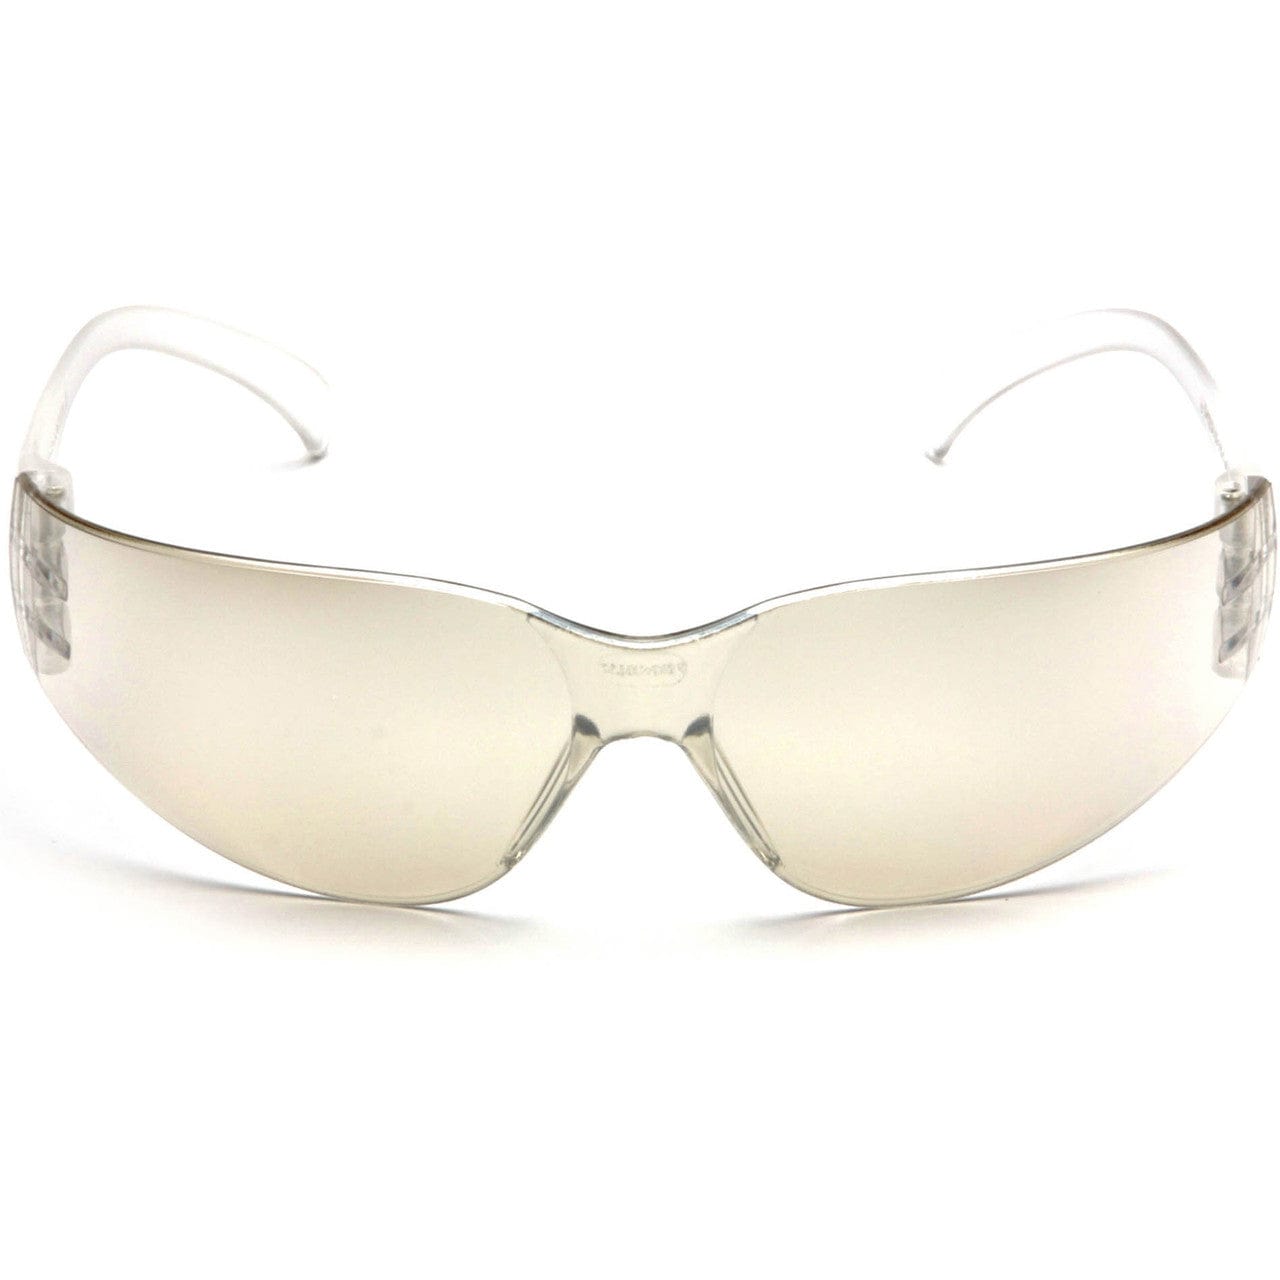 Pyramex Intruder Safety Glasses with Indoor/Outdoor Lens S4180S Front View